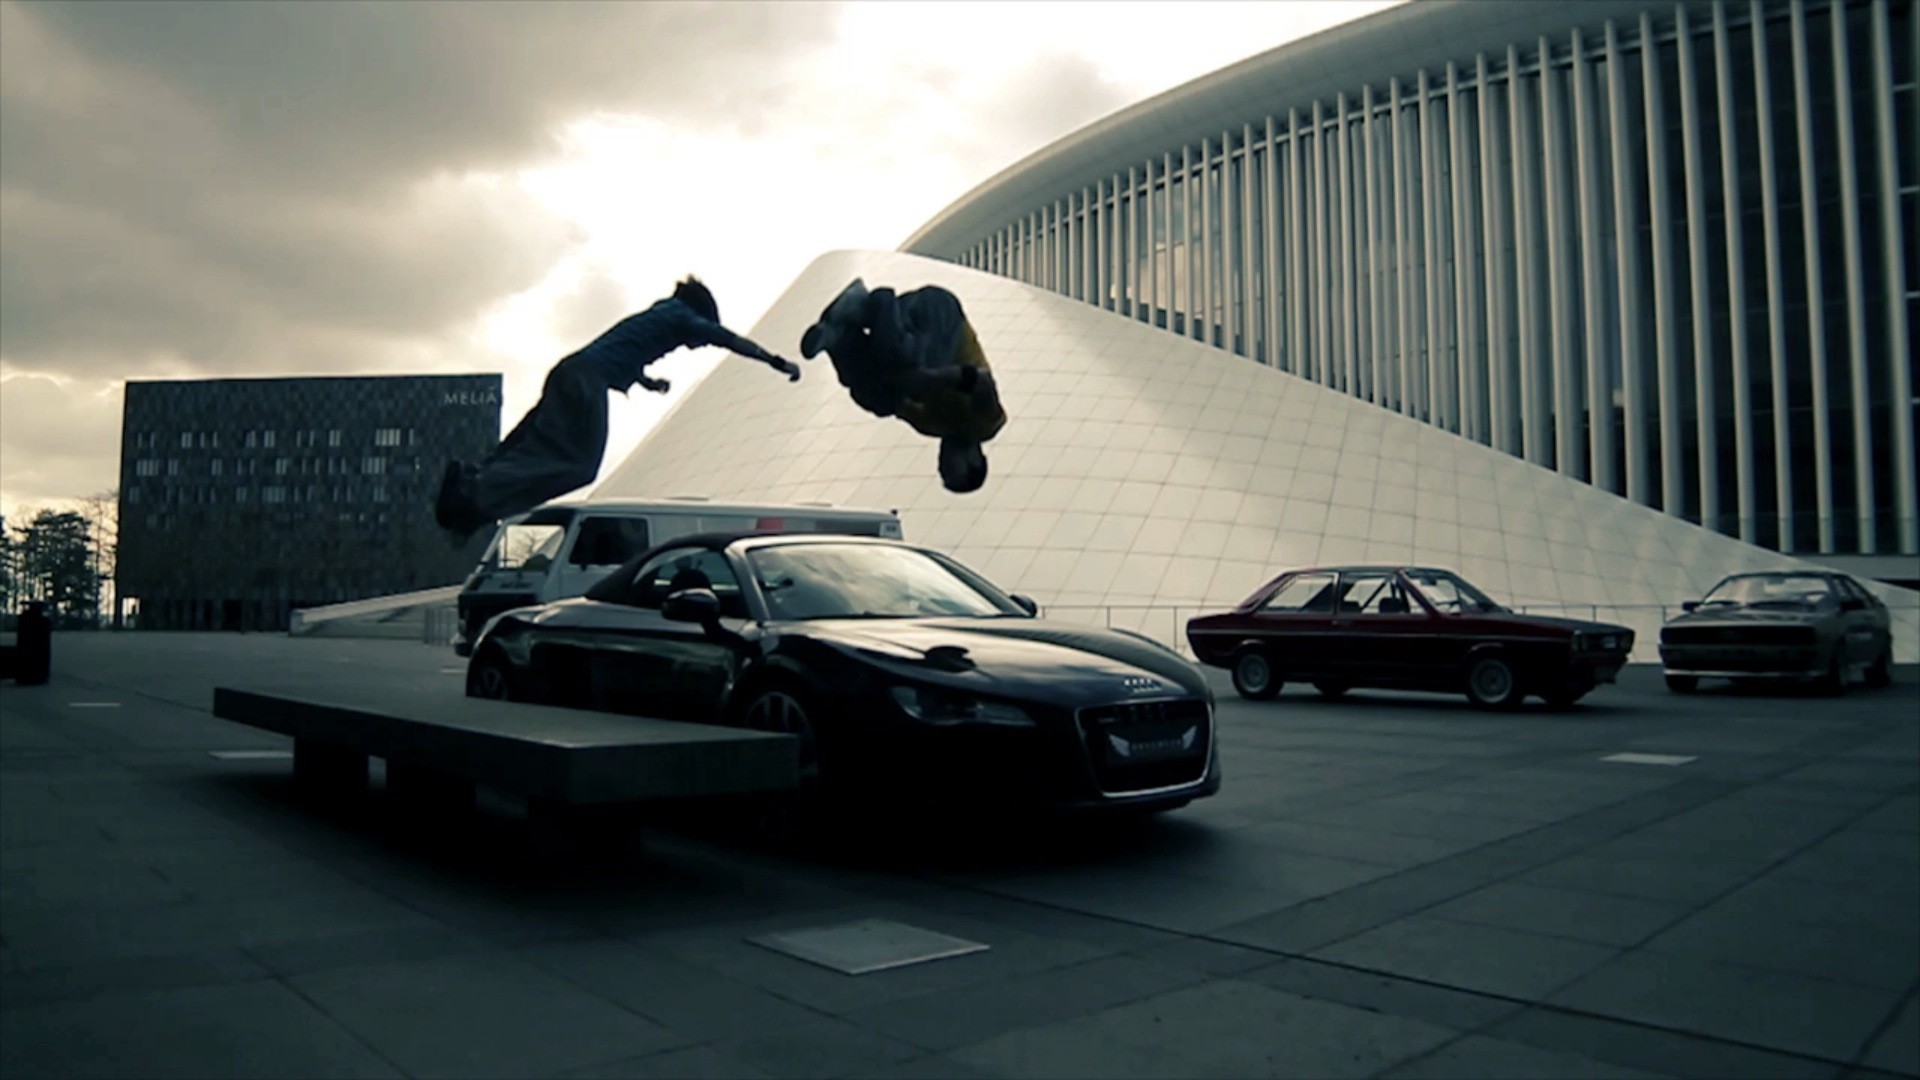 1920x1080 Parkour in the parking lot wallpapers and images wallpapers 